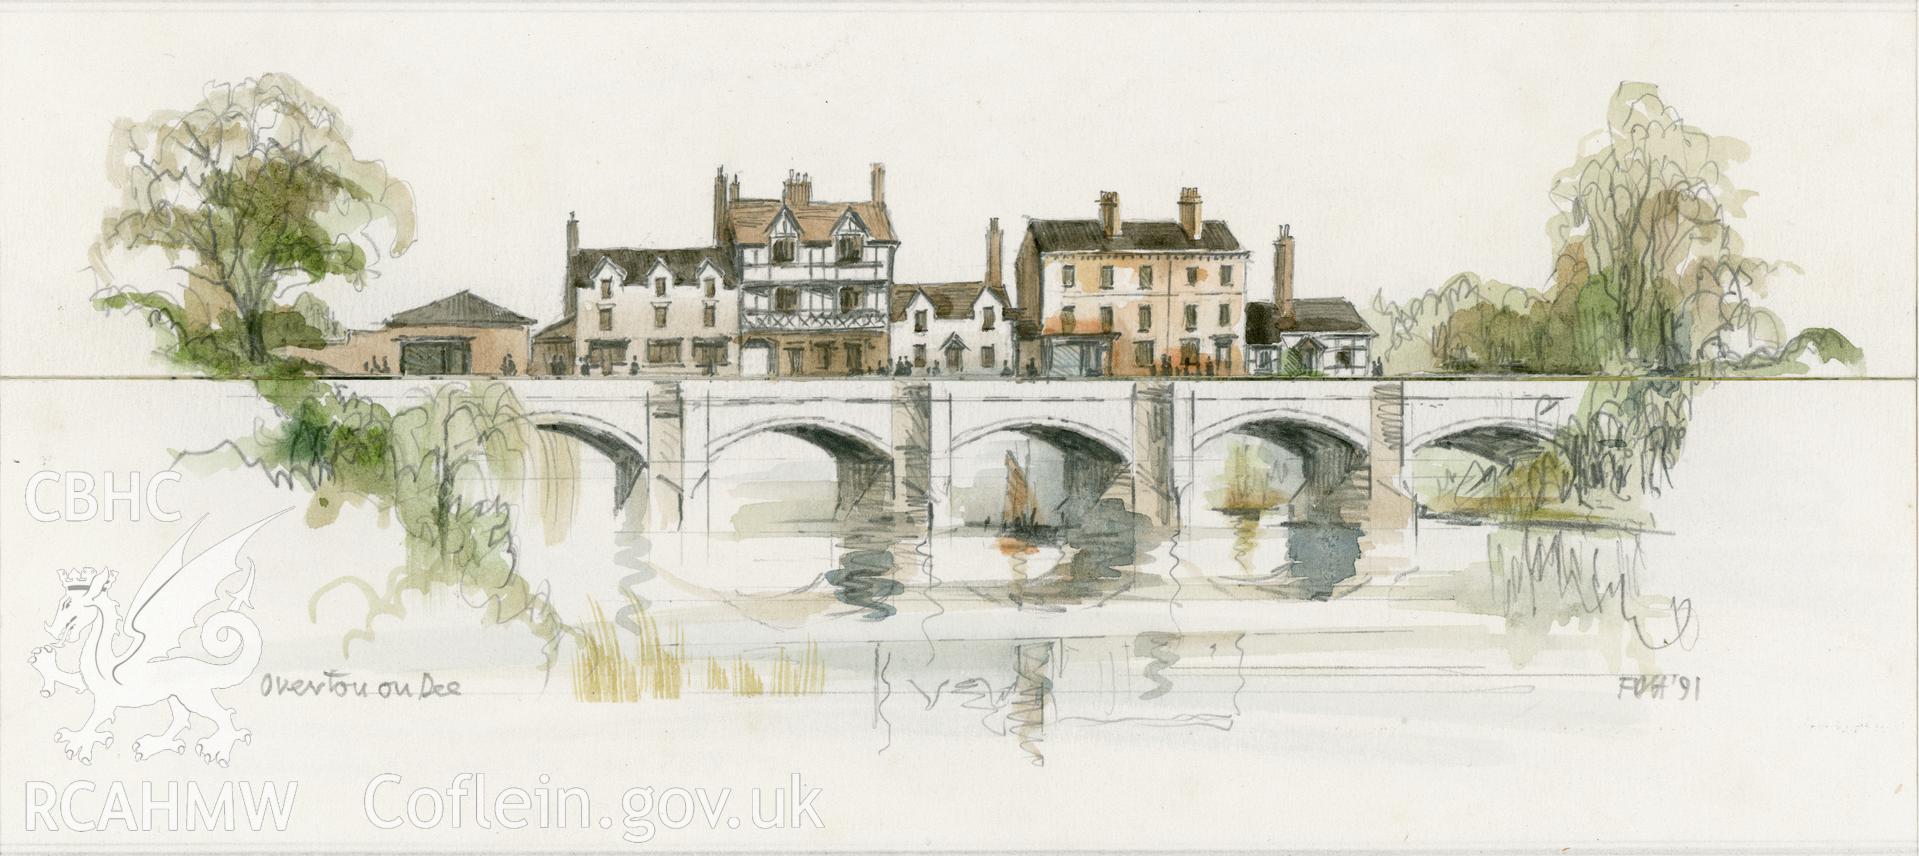 Overton-on-Dee: (pencil and watercolour) drawing showing a comparison of scales between the buildings of the High Street and a traditional arched bridge, with the new composite bridge (A483).